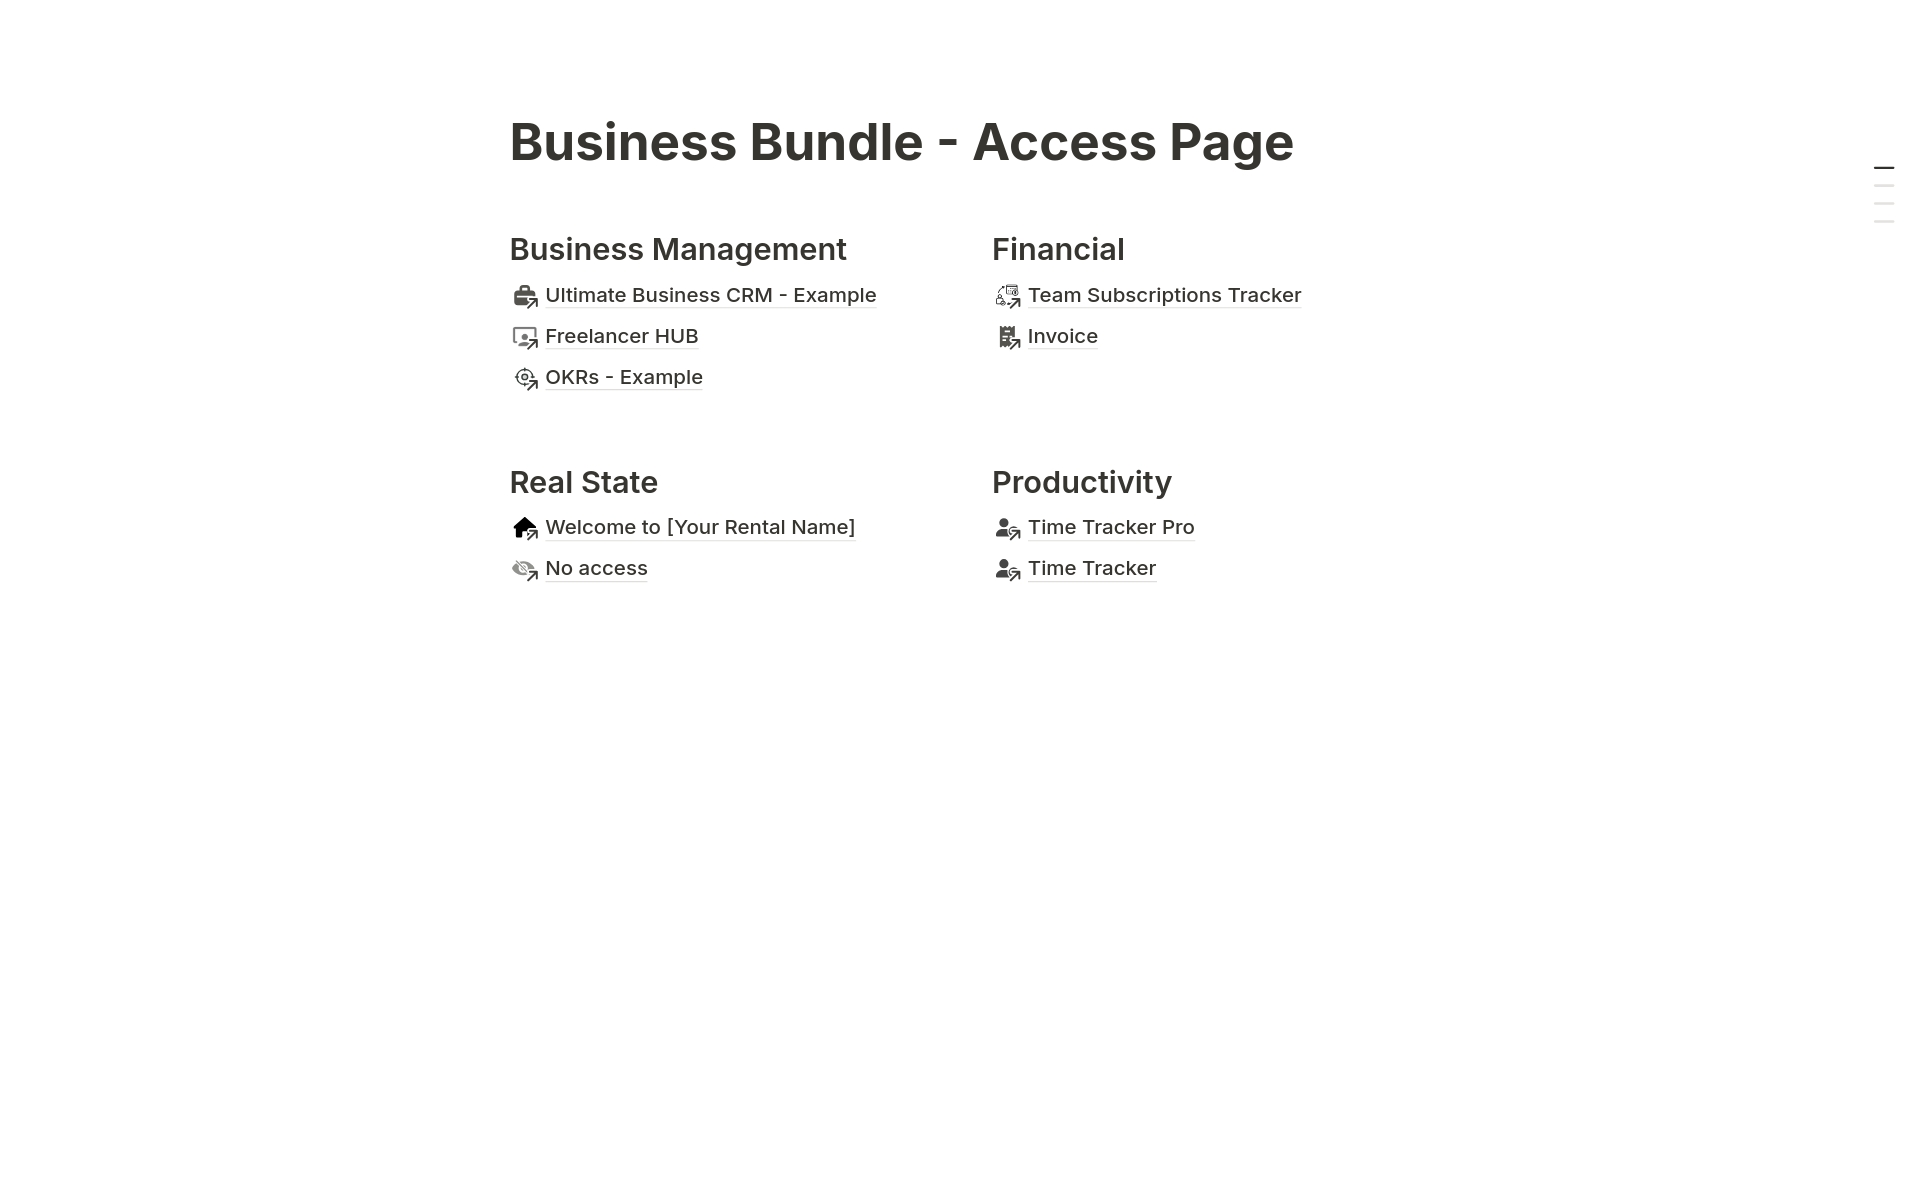 A template preview for Business Bundle